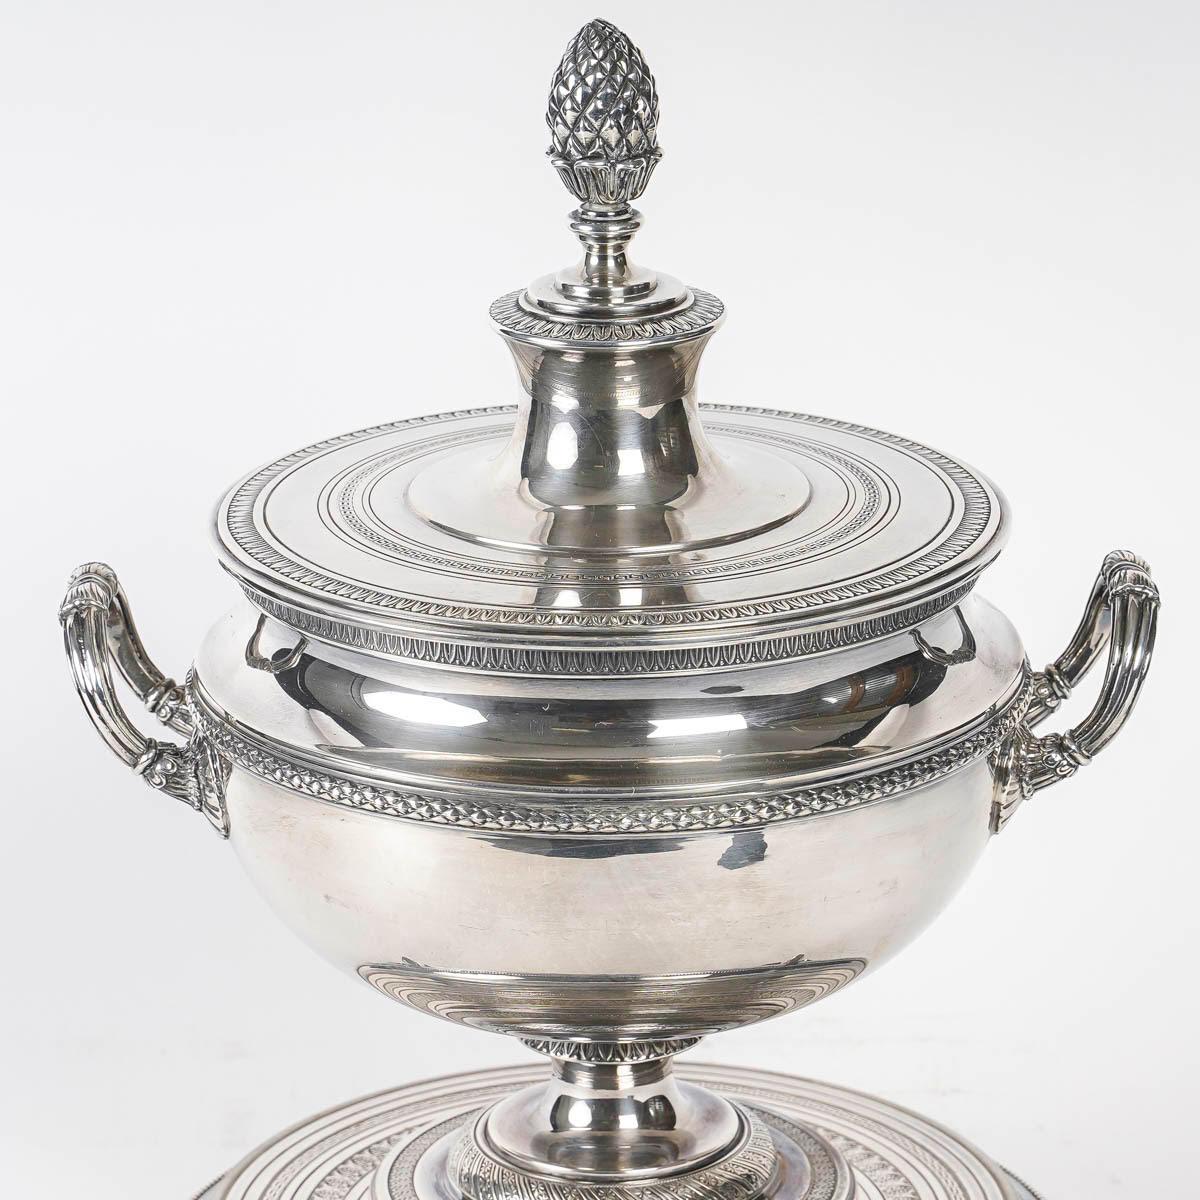 Soup tureen or centrepiece from the House of CHRYSALIA Goldsmith, Napoleon III, 19th Century.

Soup tureen or centrepiece in bronze and silver-plated metal by the House of CHRYSALIA Goldsmith, 19th century, Napoleon III period.
h: 40cm, w: 29cm, d: